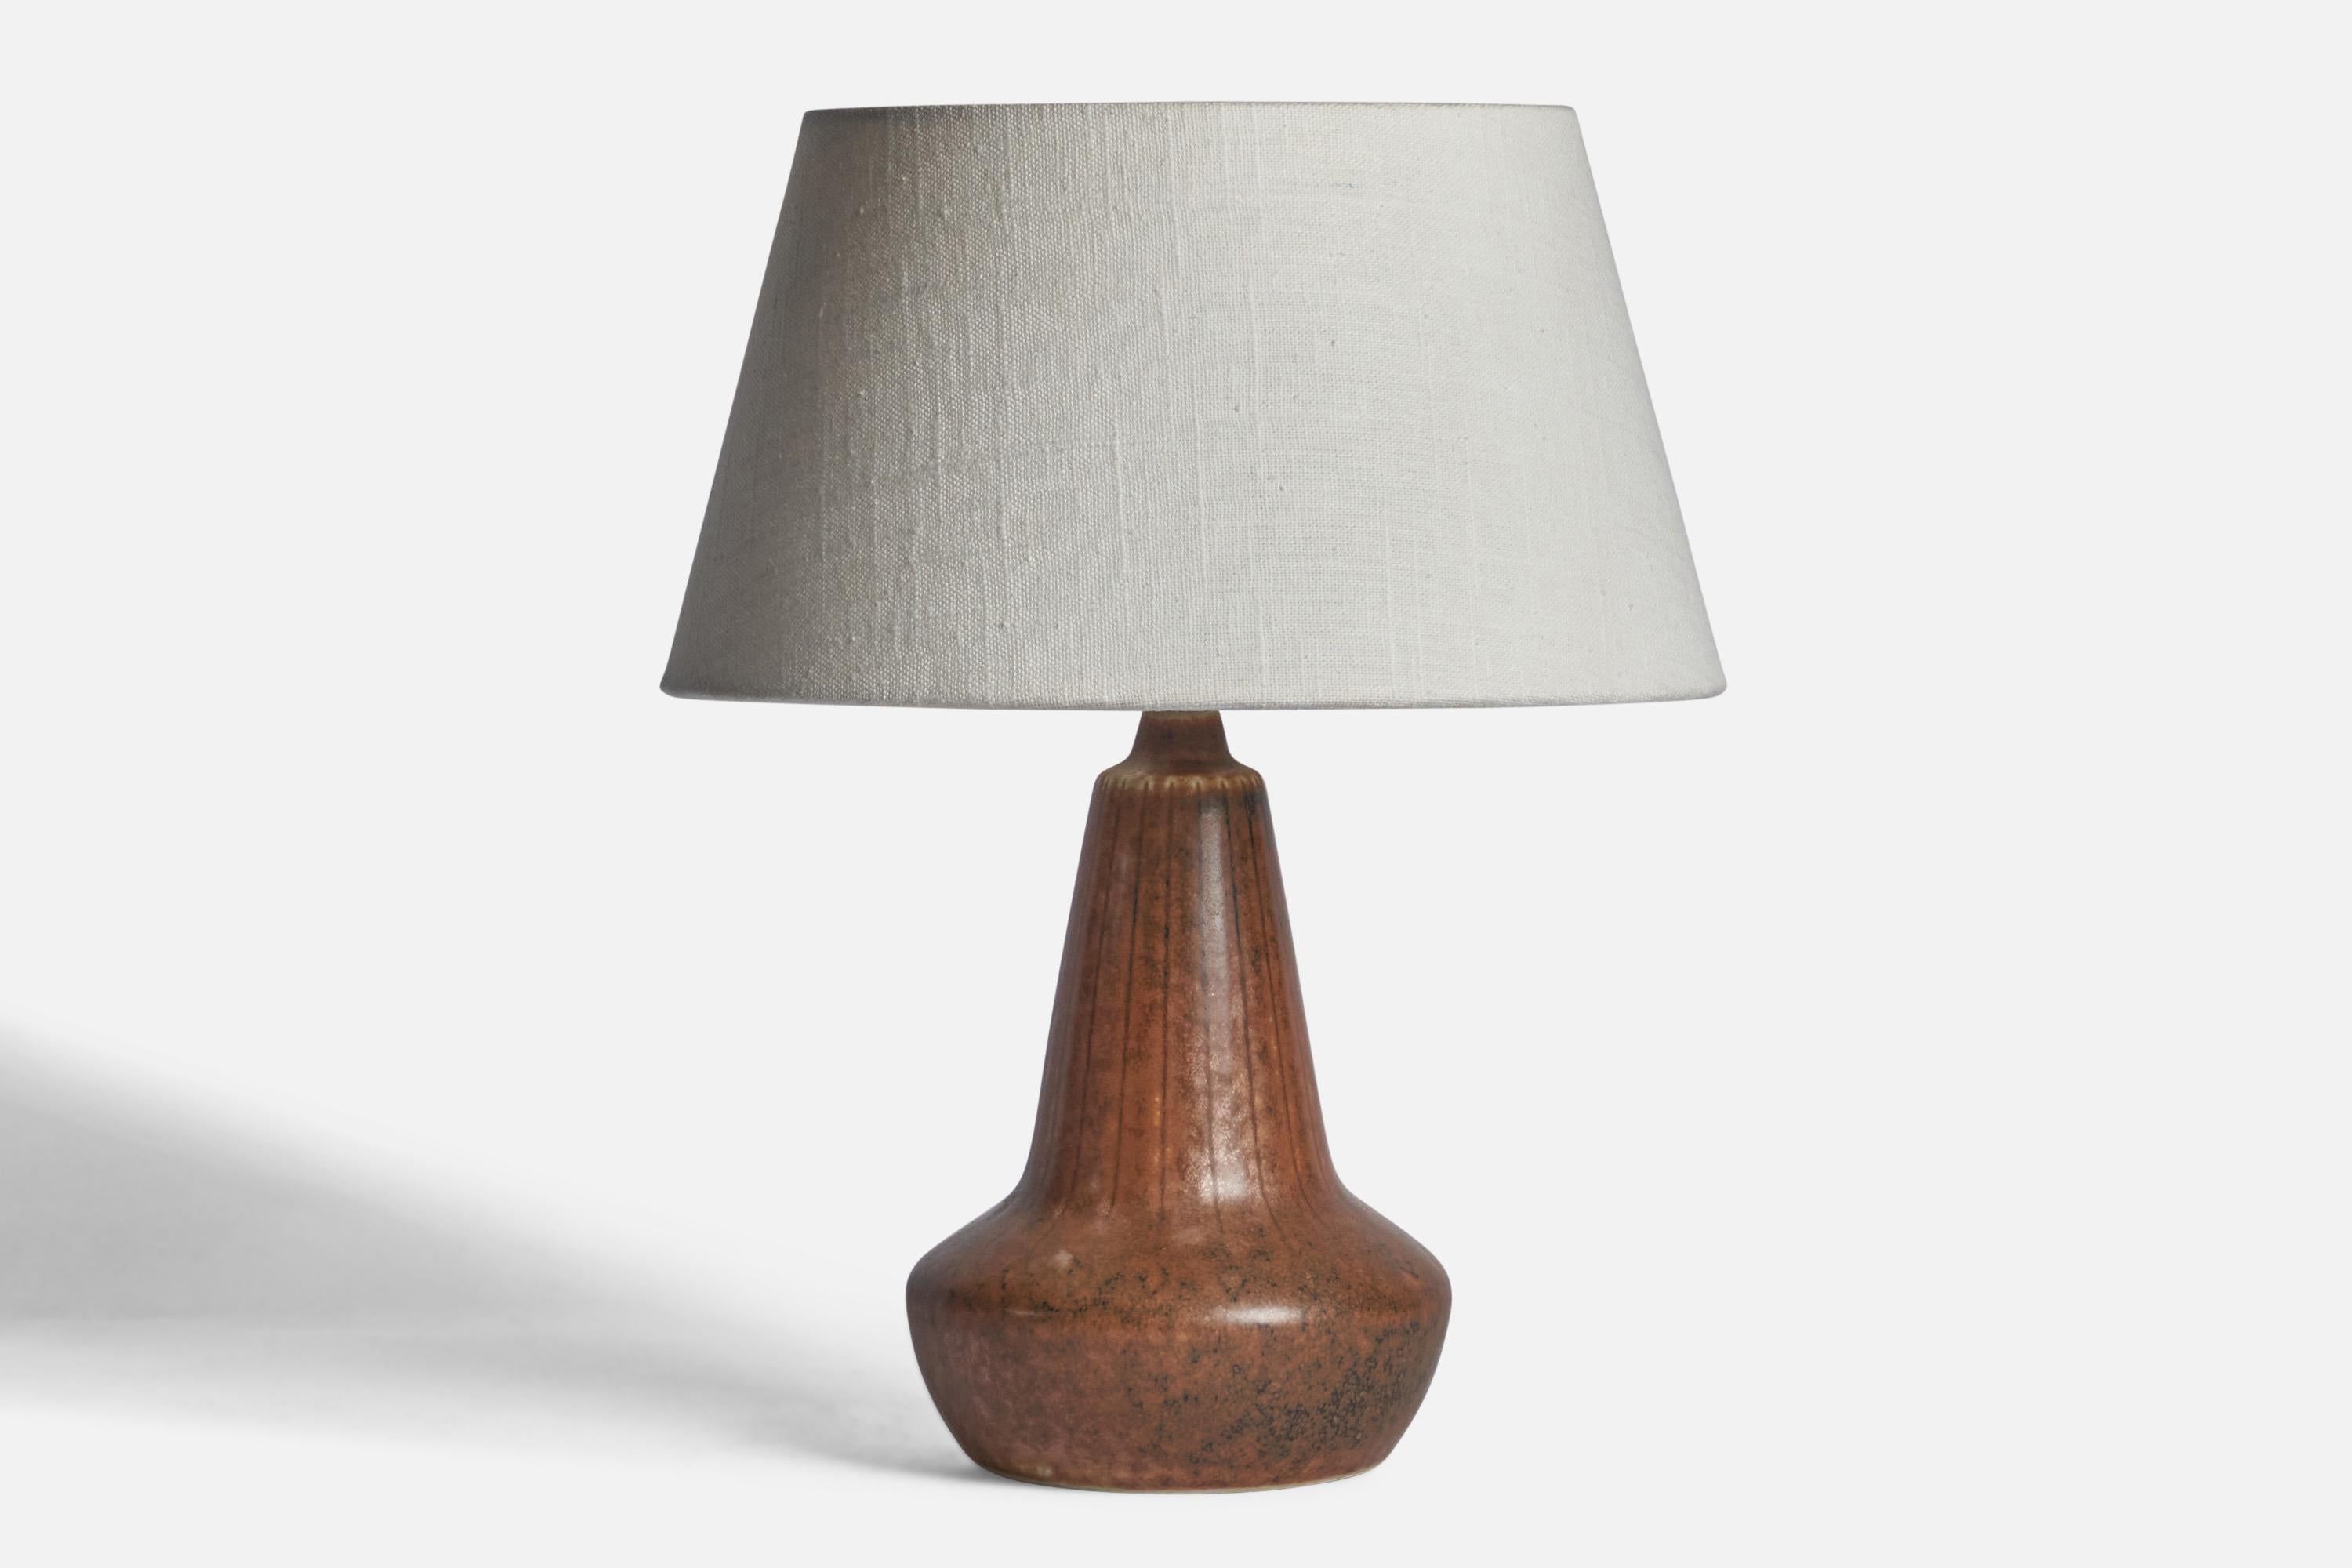 A small brown-glazed stoneware table lamp designed by Gunnar Nylund and produced by Rörstrand, Sweden, 1940s.

Dimensions of Lamp (inches): 10” H x 5.25” Diameter
Dimensions of Shade (inches): 7” Top Diameter x 10” Bottom Diameter x